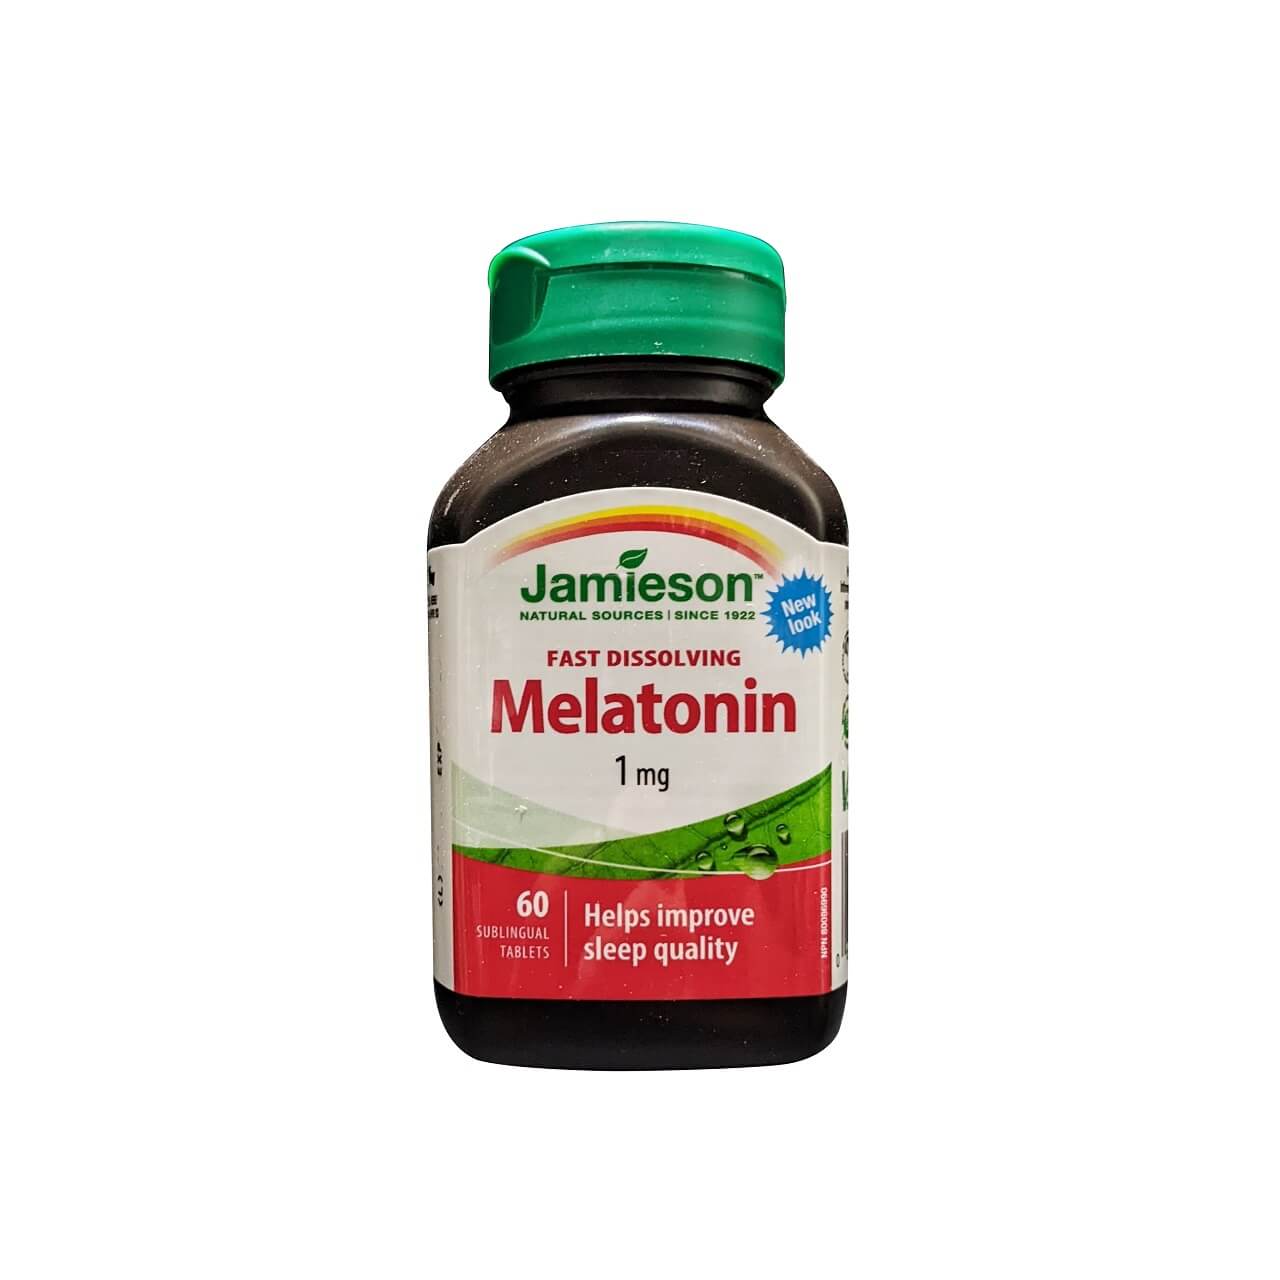 Product label for Jamieson Melatonin 1 mg Fast Dissolving (60 tablets) in English